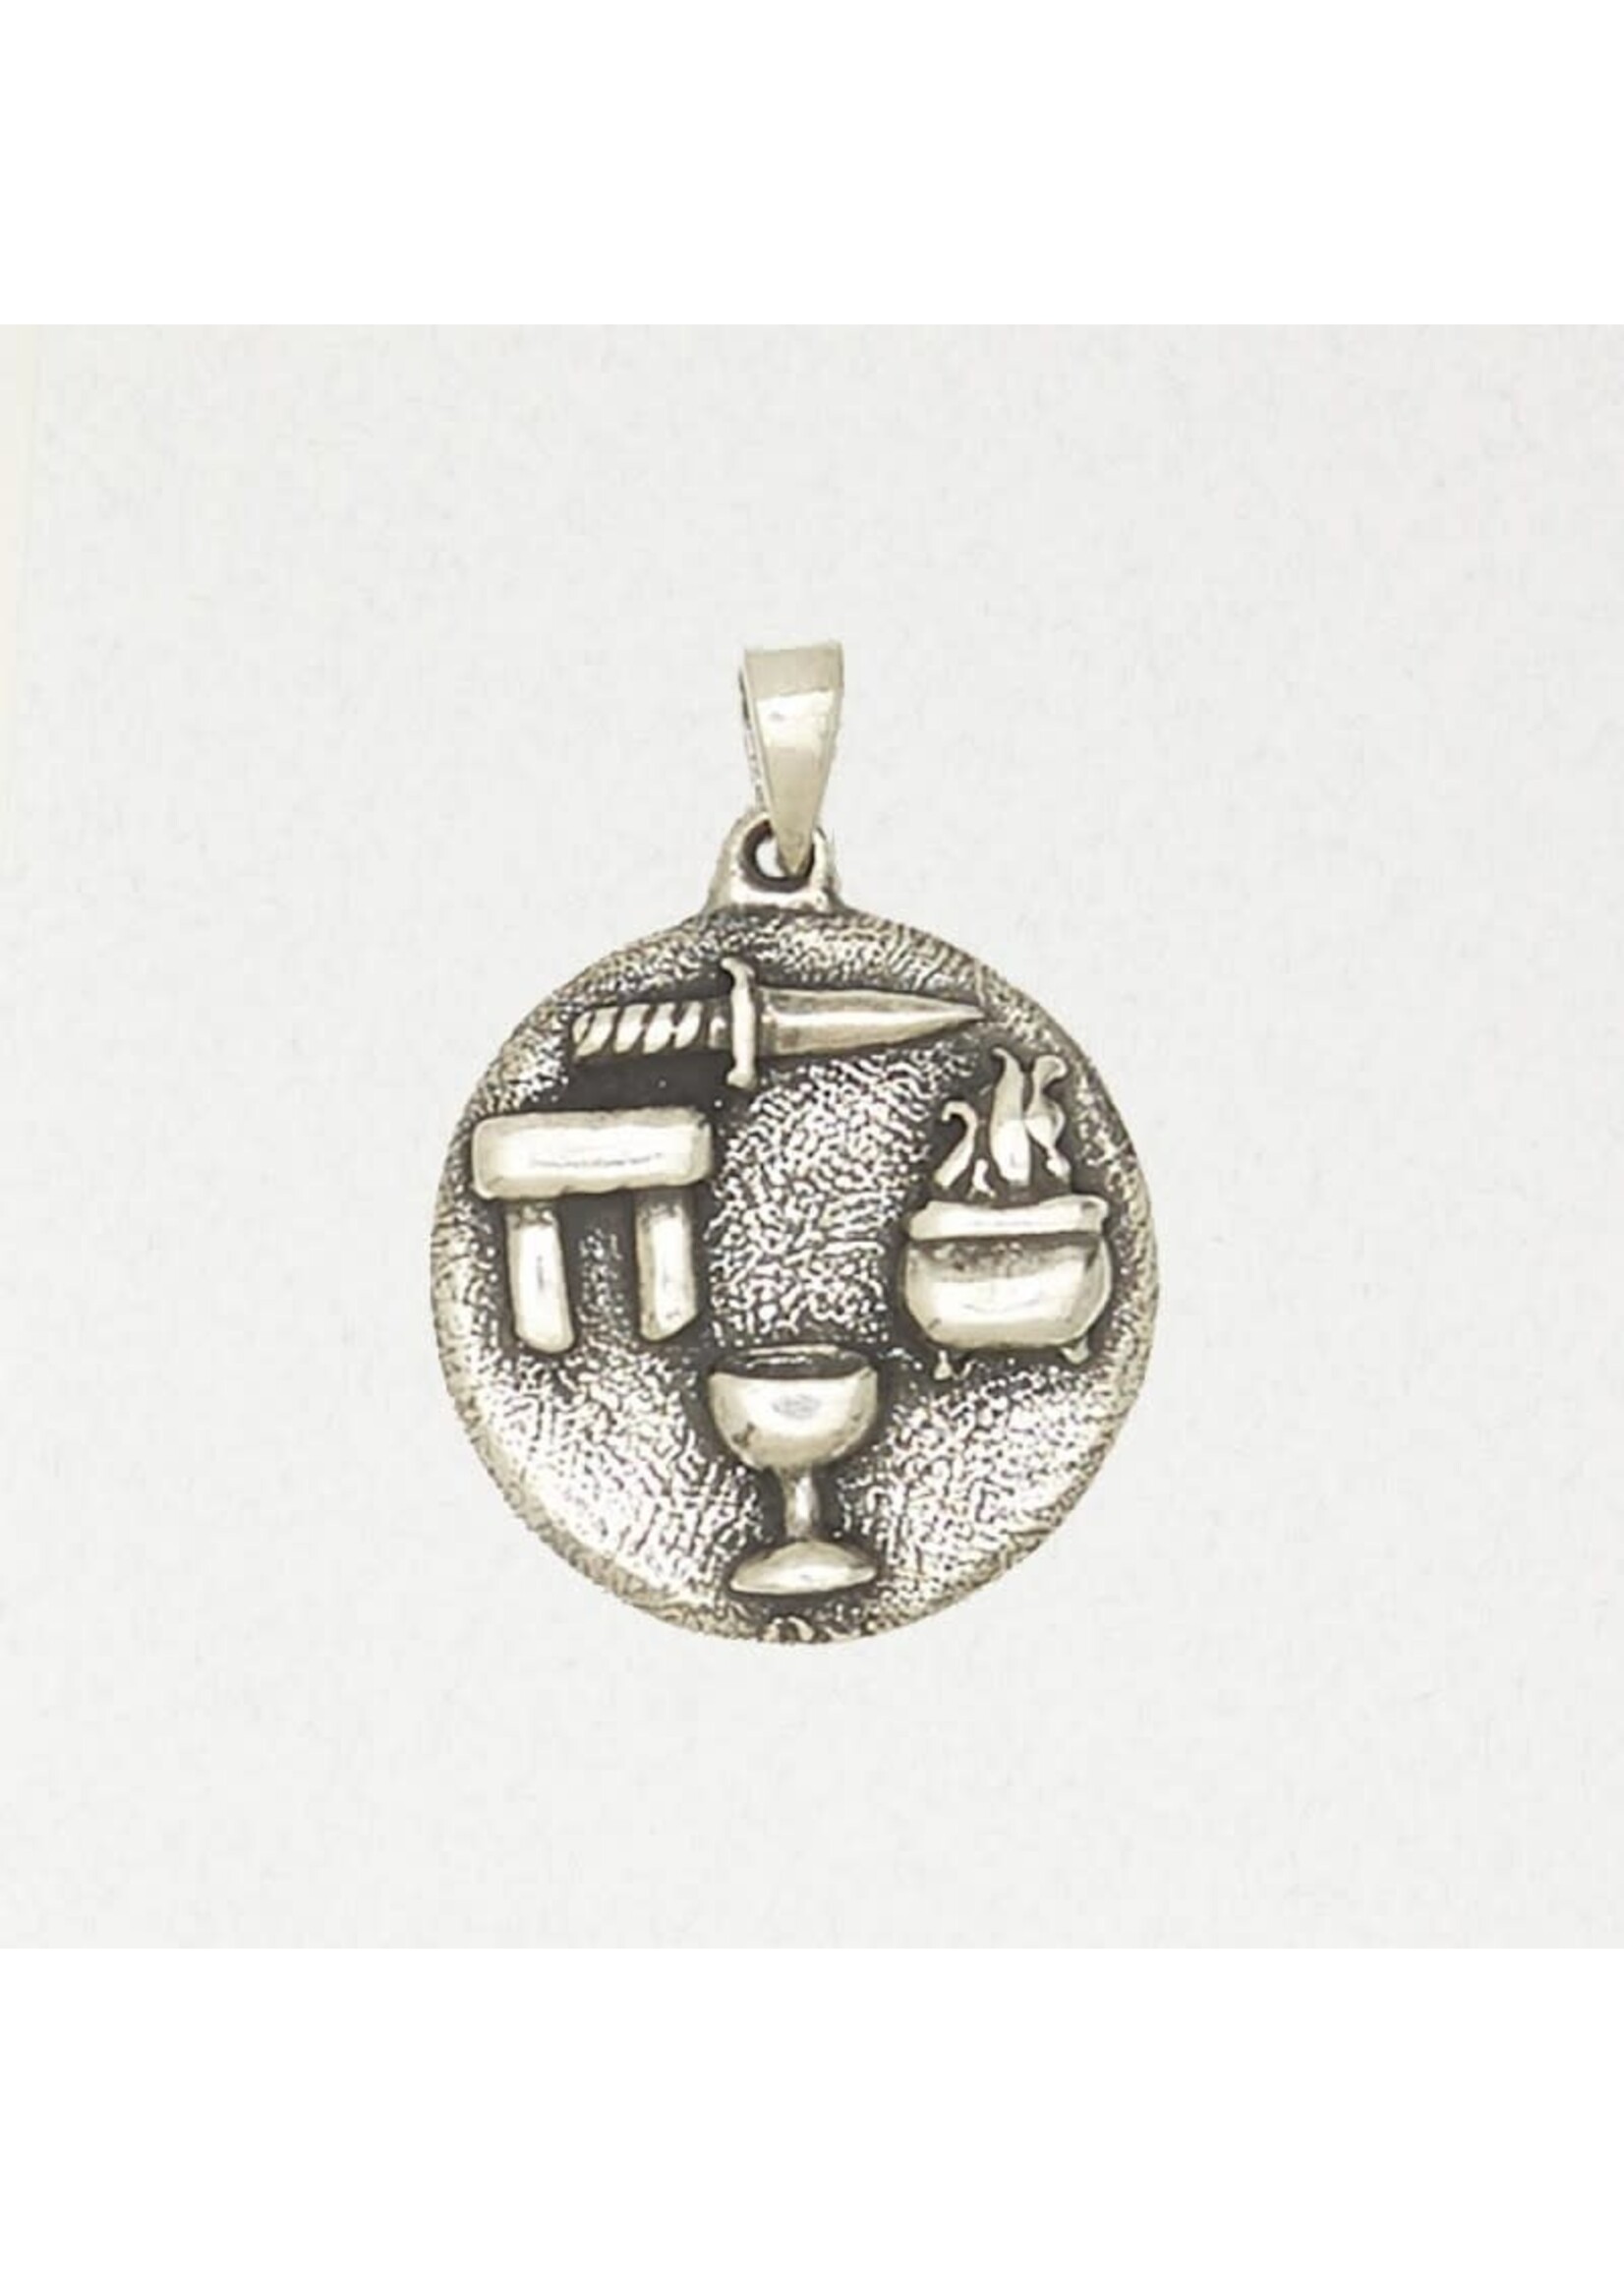 Wicca Pewter Pendant - Four Sacred Things